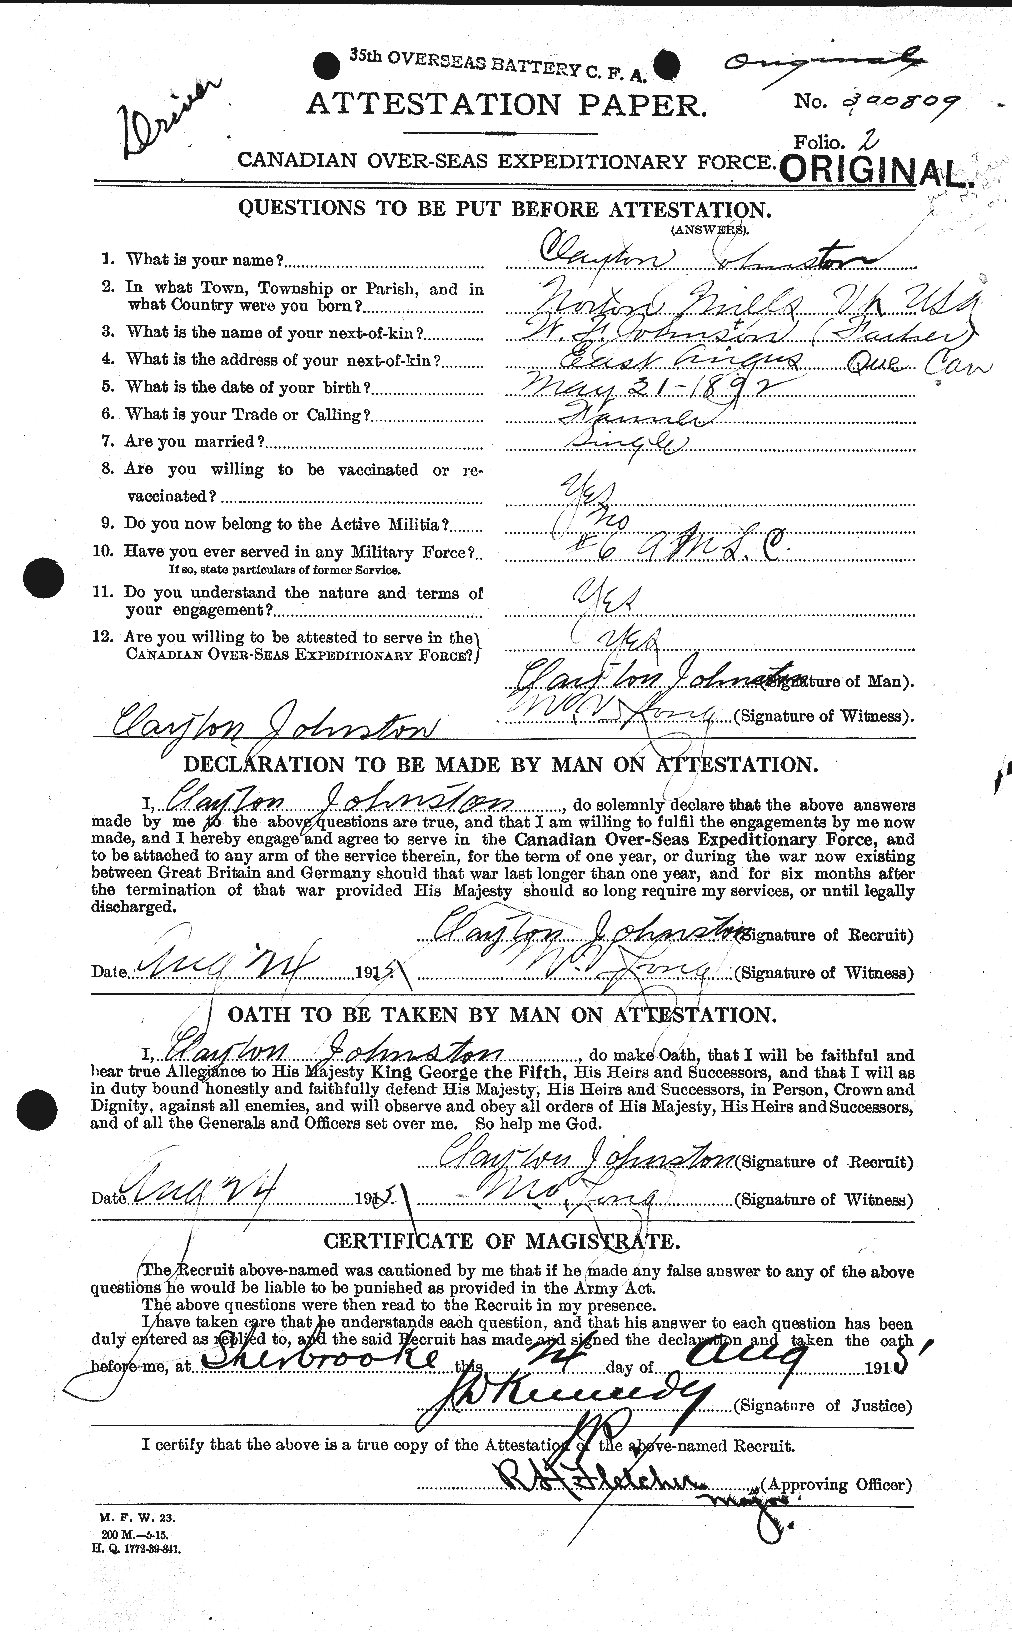 Personnel Records of the First World War - CEF 423138a